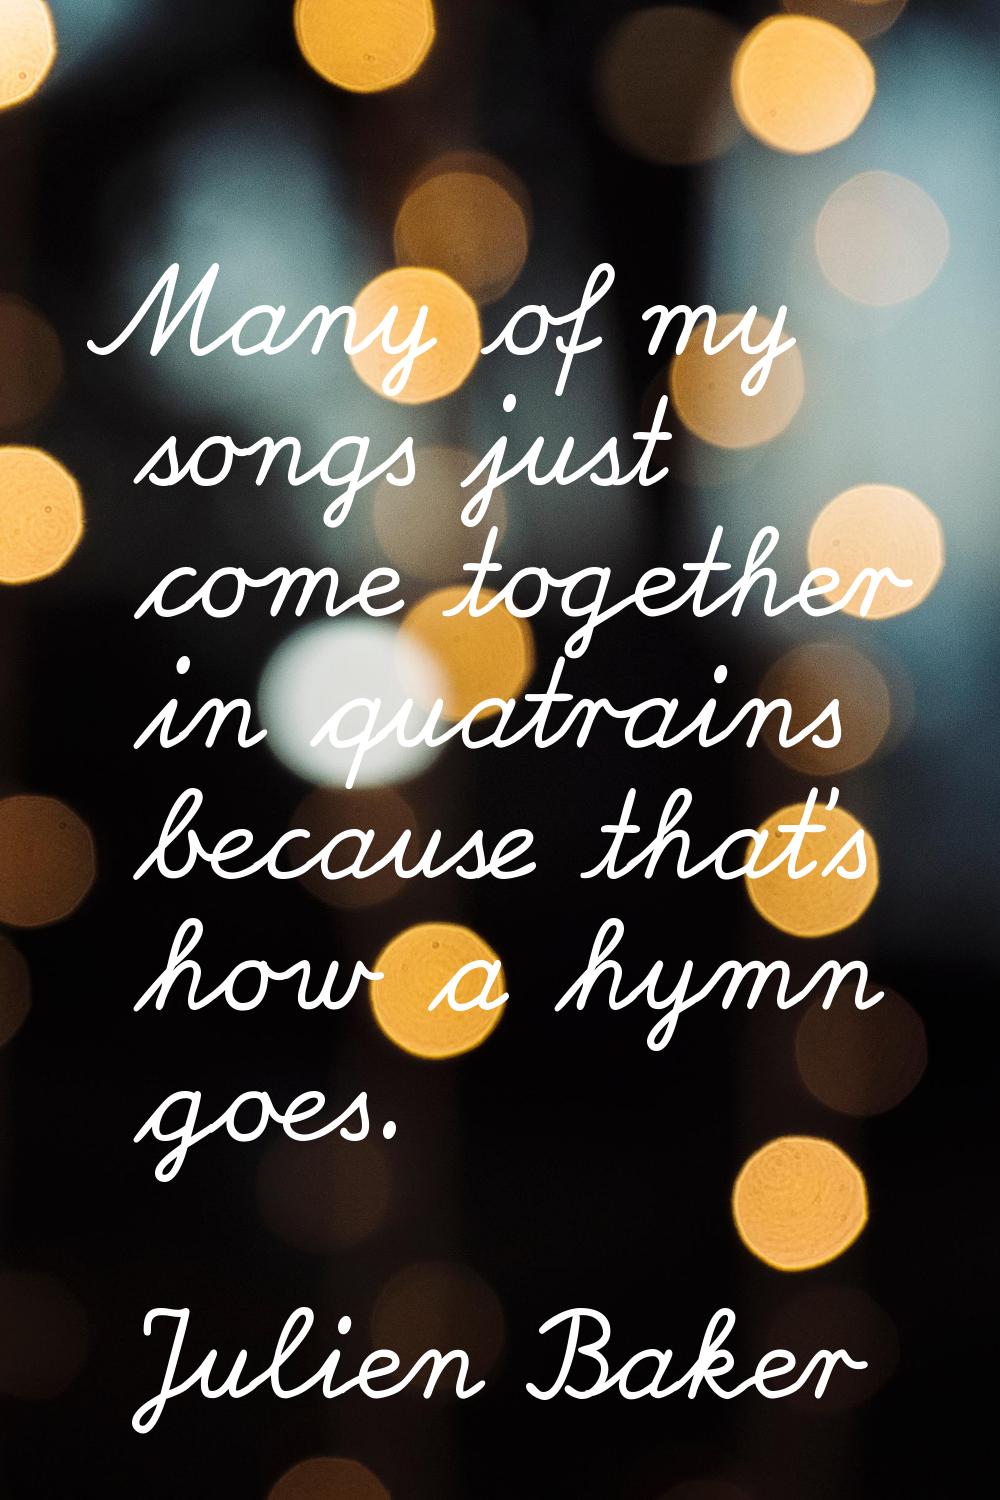 Many of my songs just come together in quatrains because that's how a hymn goes.